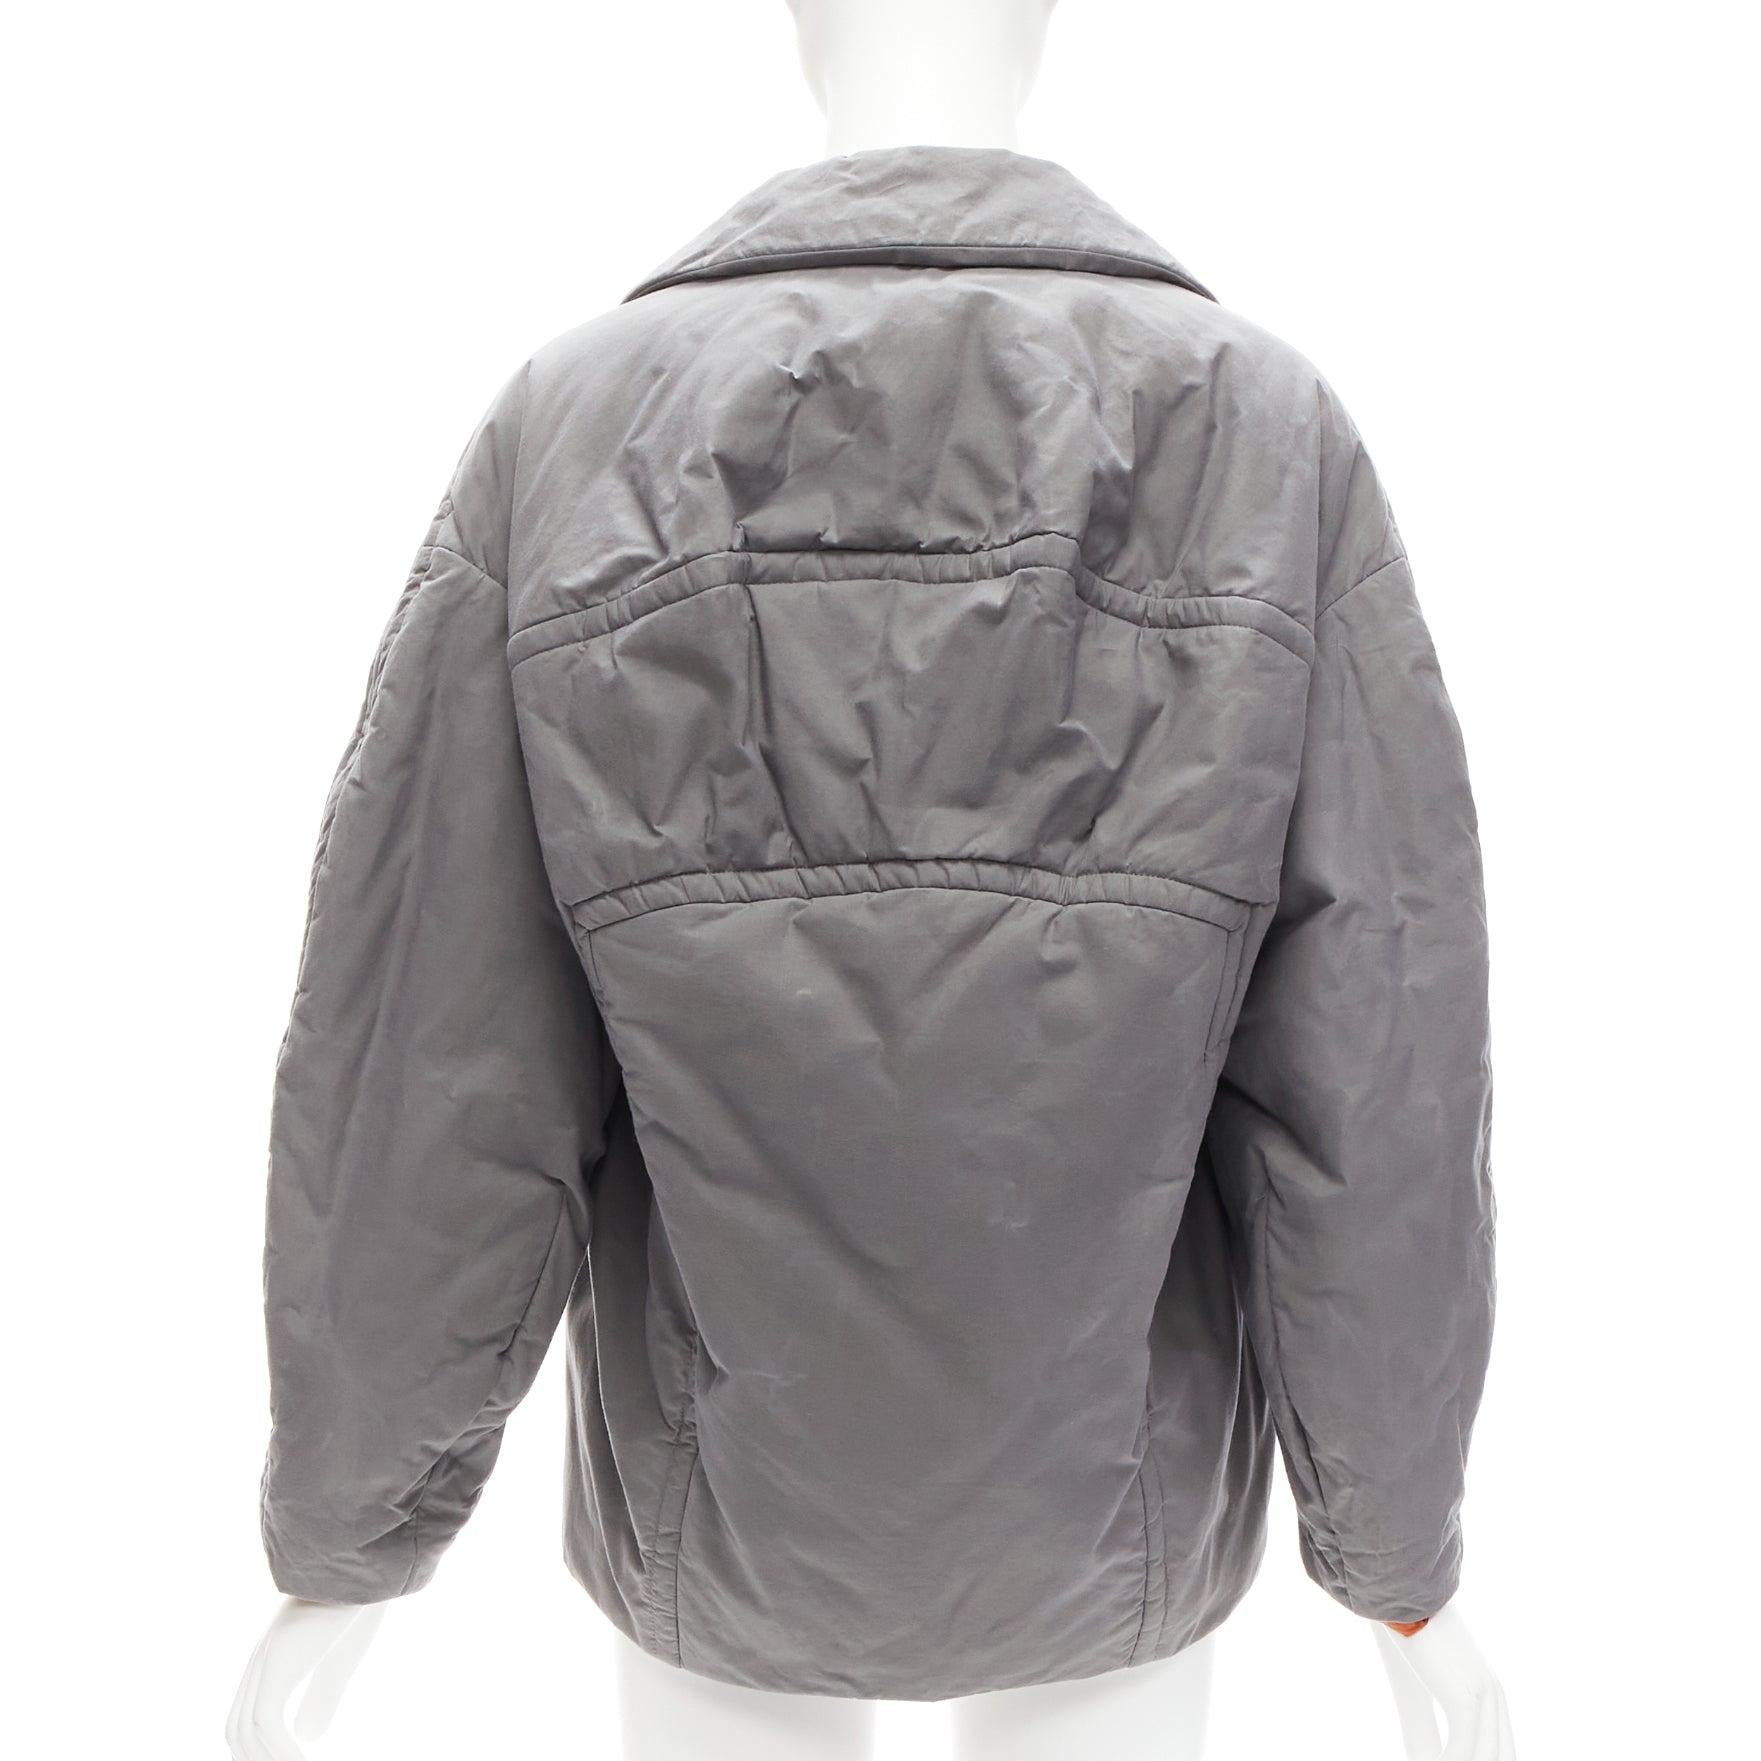 MARNI grey washed cotton brown lined padded cocoon MA1 jacket IT36 XS
Reference: CELG/A00246
Brand: Marni
Material: Cotton
Color: Grey
Pattern: Solid
Closure: Button
Lining: Brown Fabric
Extra Details: MA1 bomber inspired. Hidden buttons. Cocoon